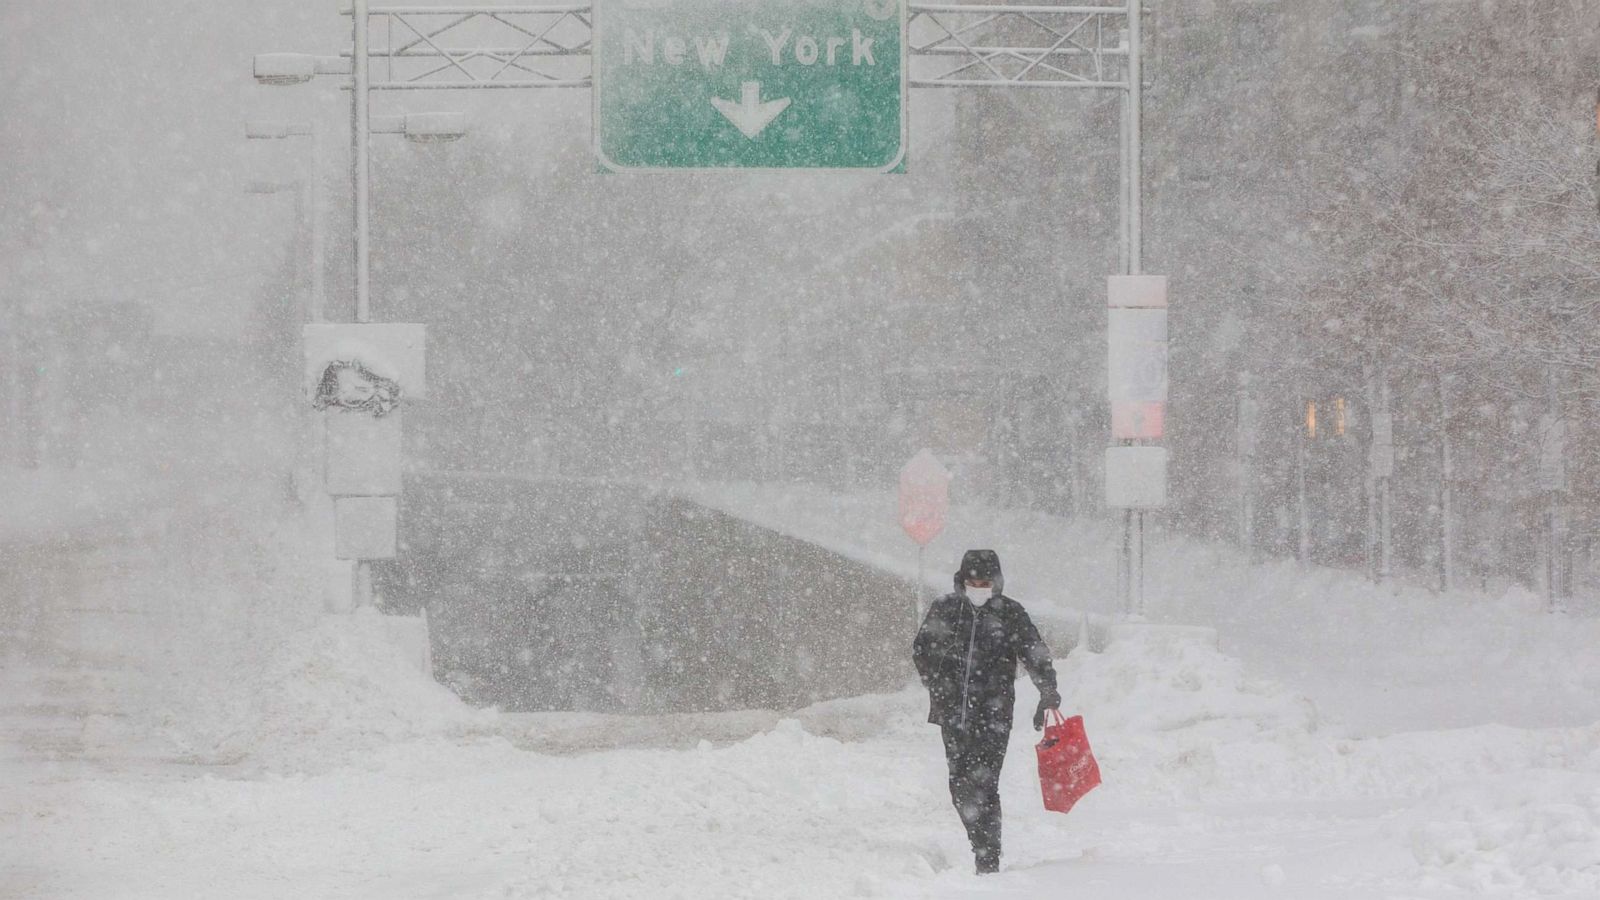 Blizzard Warning Issued For Midwest As Storm Moves Into Northeast Abc News